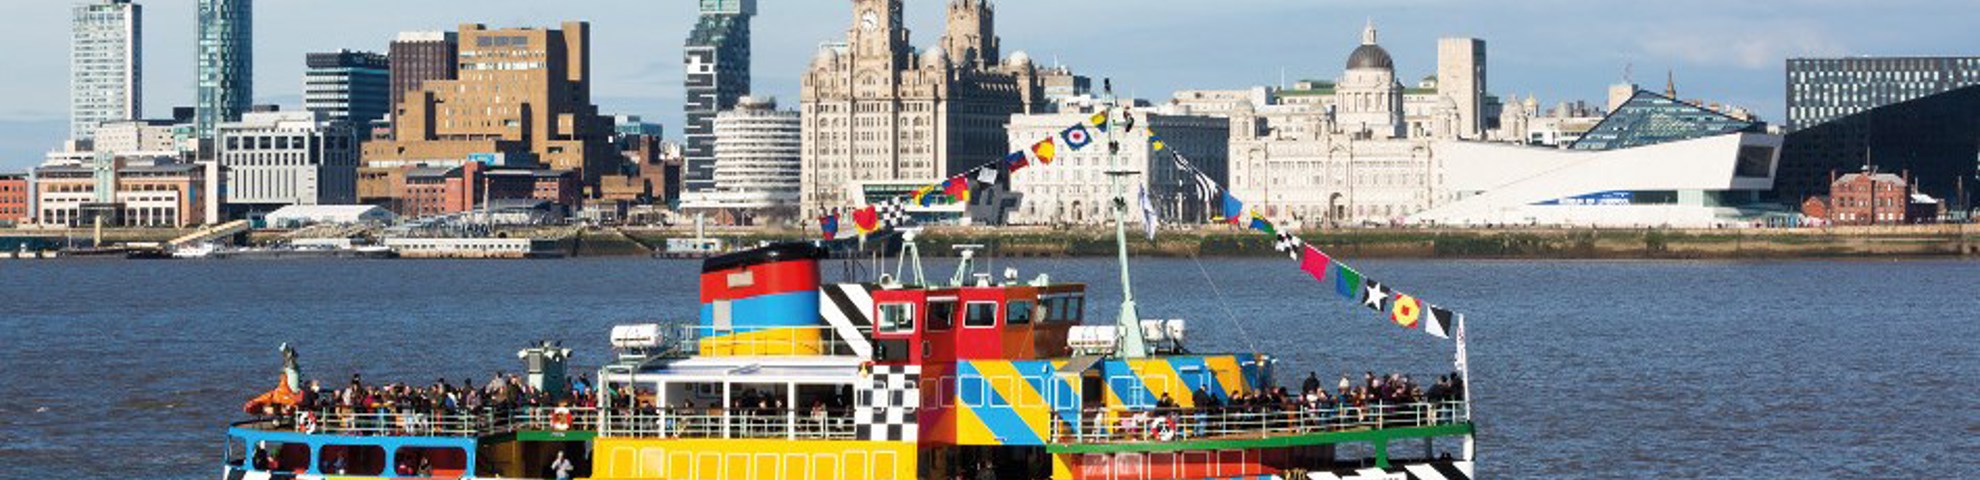 The Merseyferry in the mersey with the liverpool skyline in the background. 